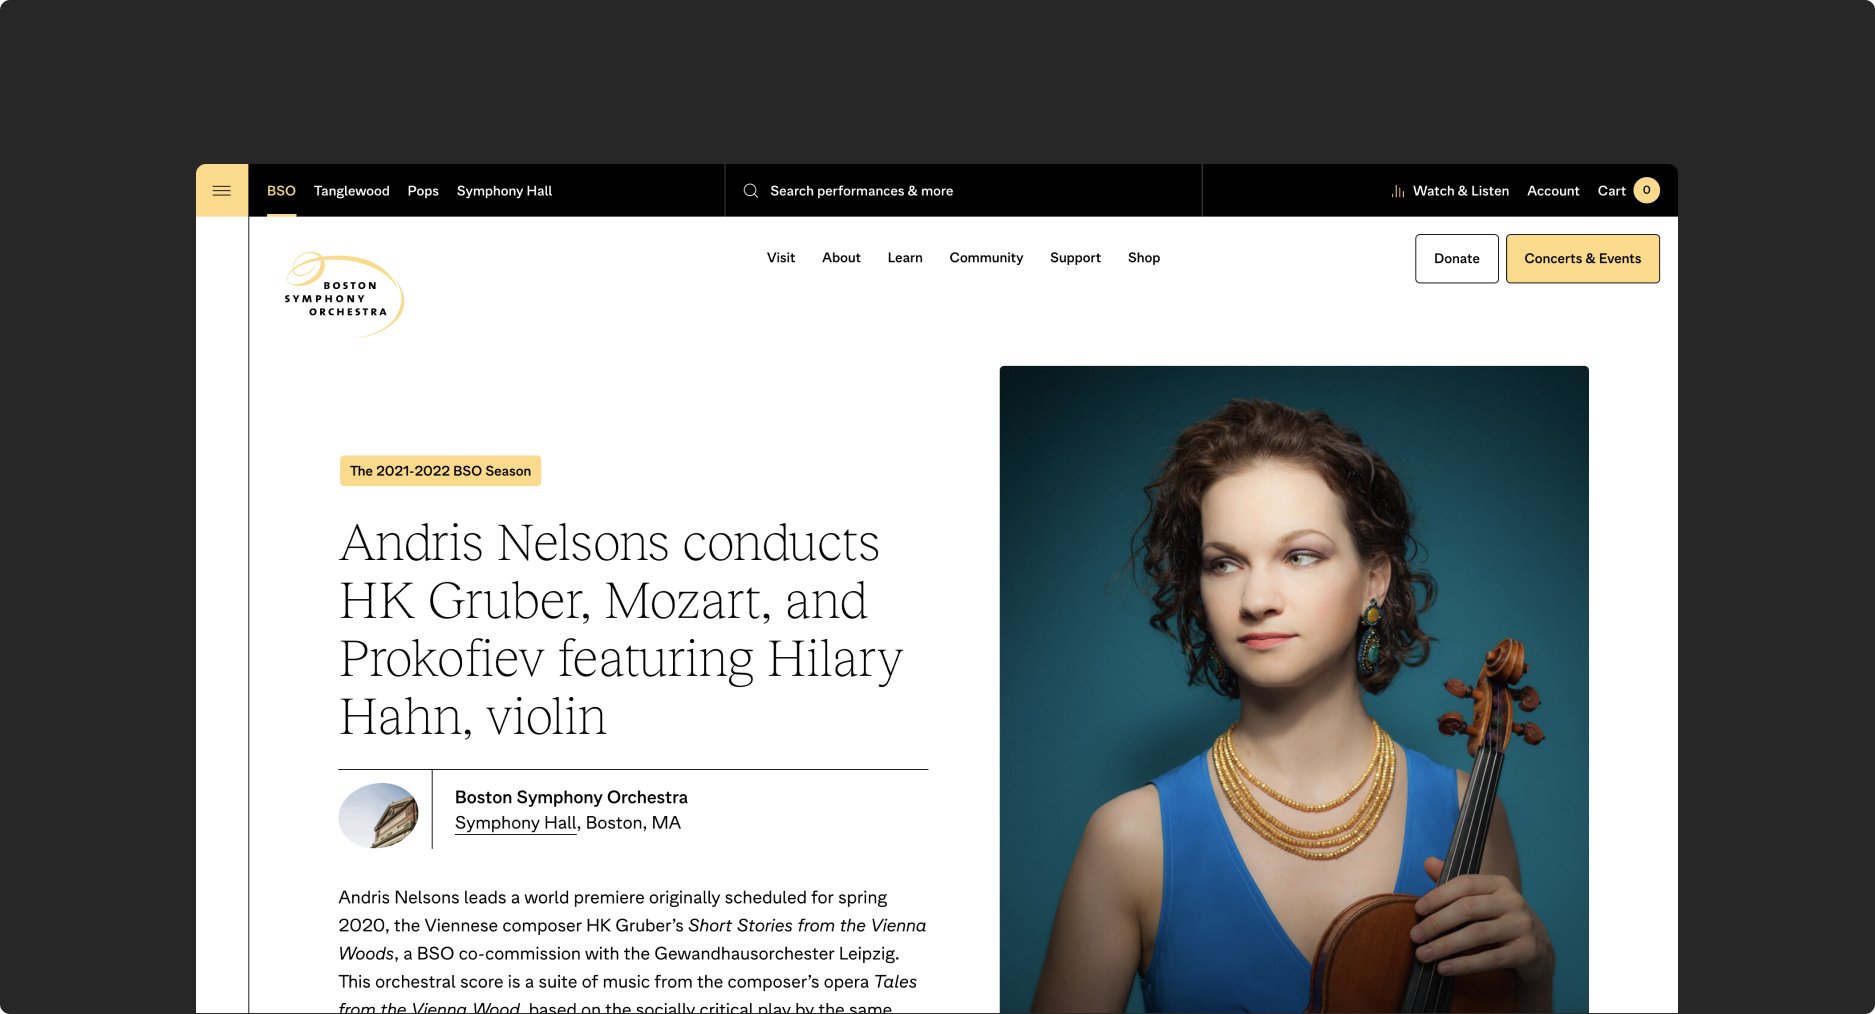 BSO event detail page for an upcoming concert, conducted by Andris Nelsons